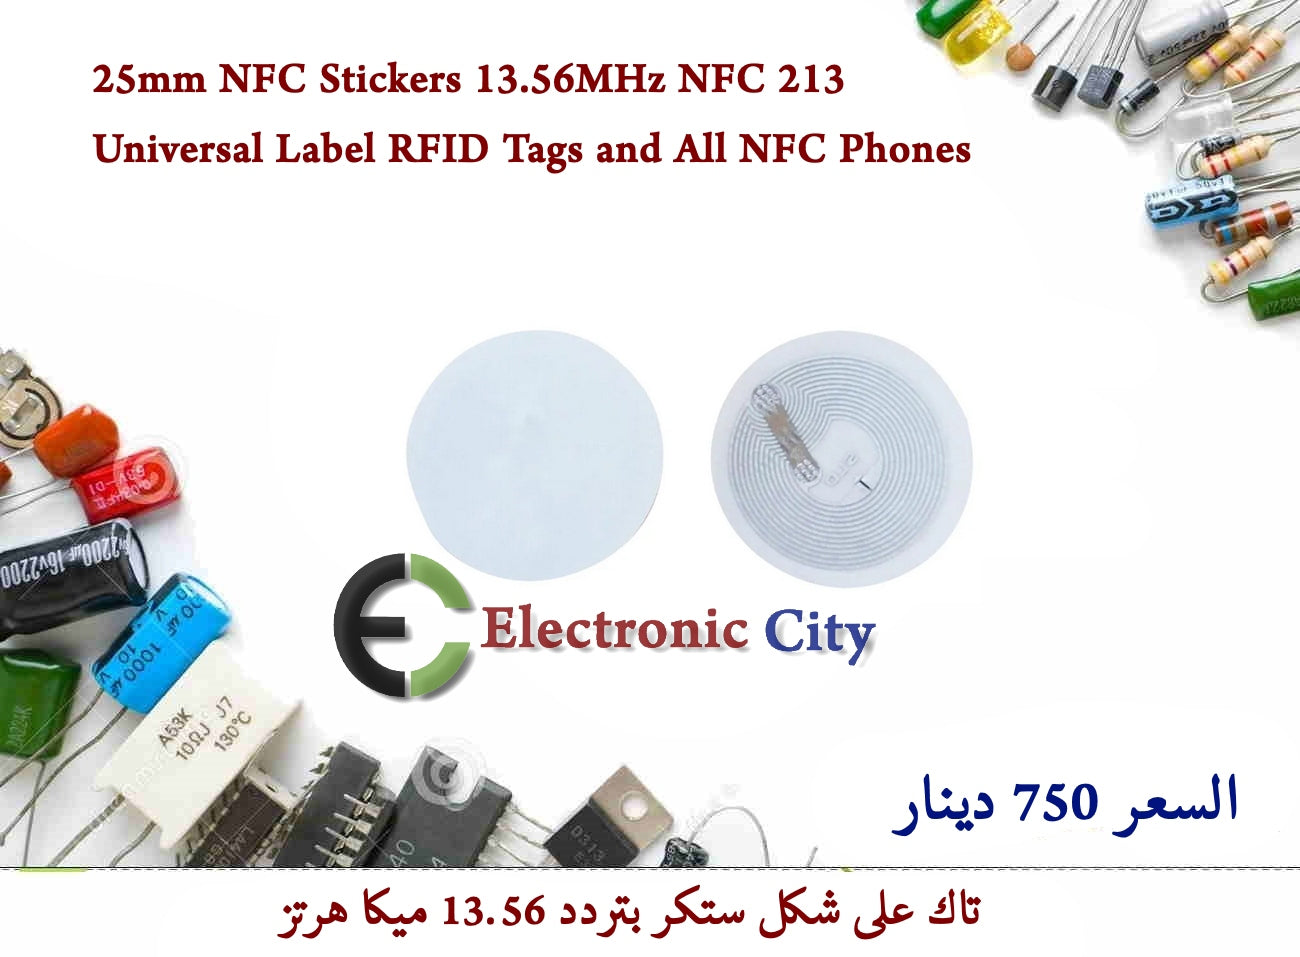 25mm NFC Stickers 13.56MHz NFC 213 Universal Label RFID Tags and All NFC Phones    GYEP0125-005